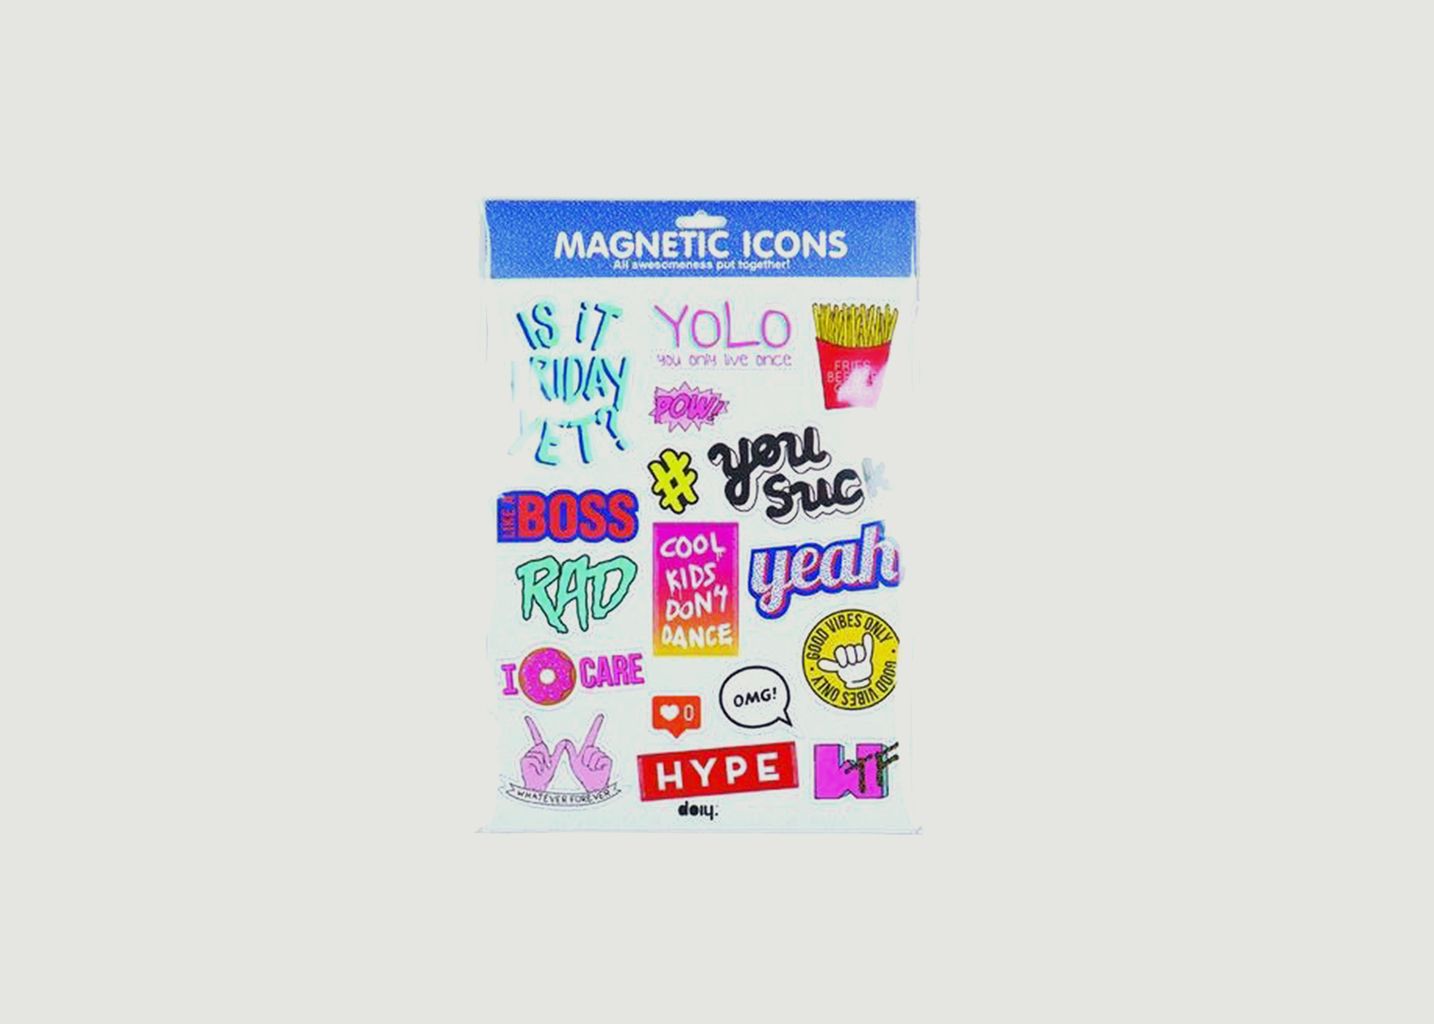 DOIY Design Multicolored Magnetic Icons With Letterings